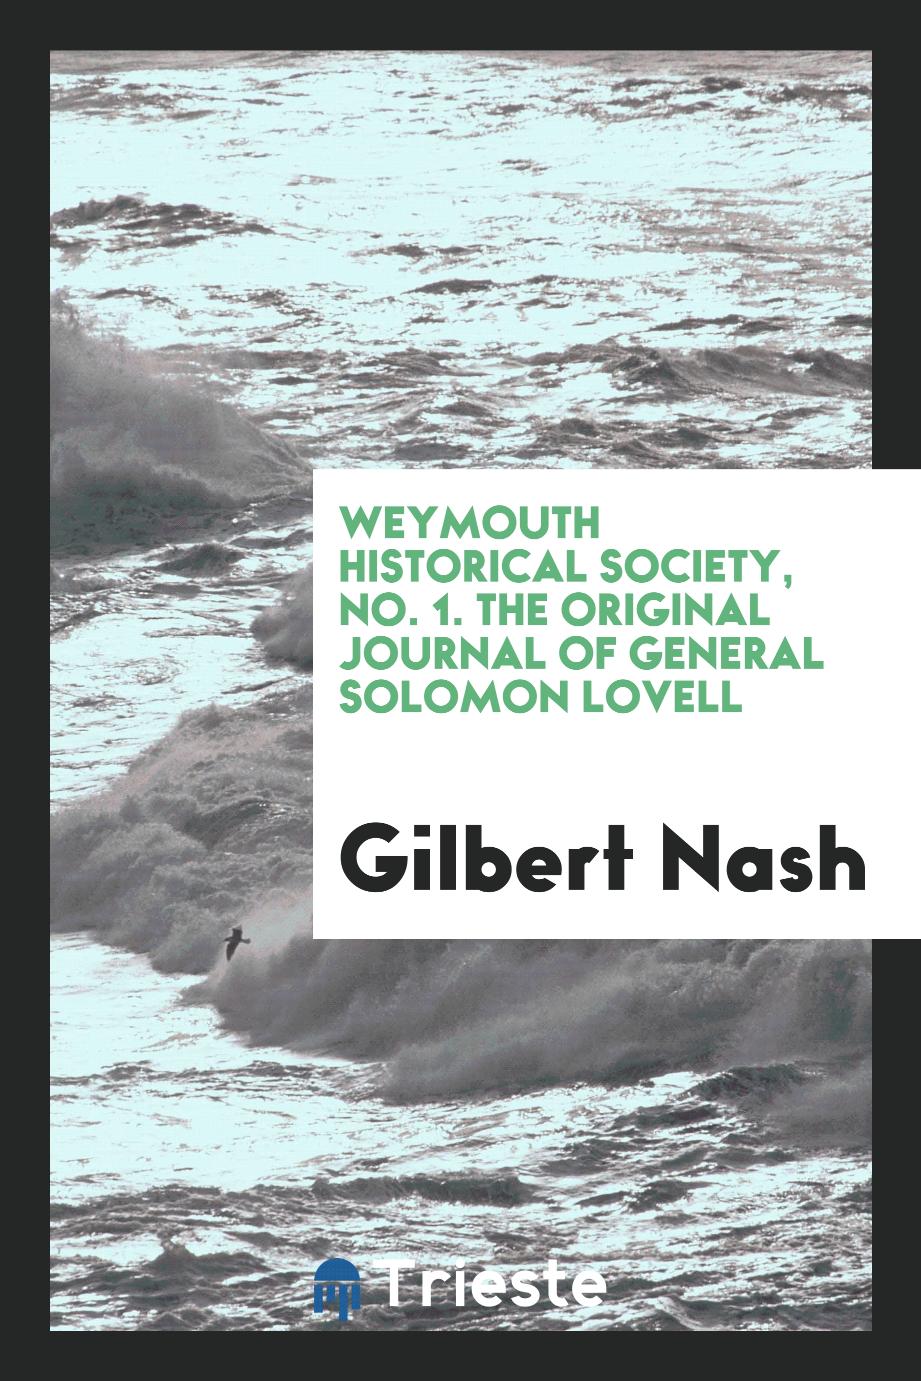 Weymouth Historical Society, No. 1. The Original Journal of General Solomon Lovell